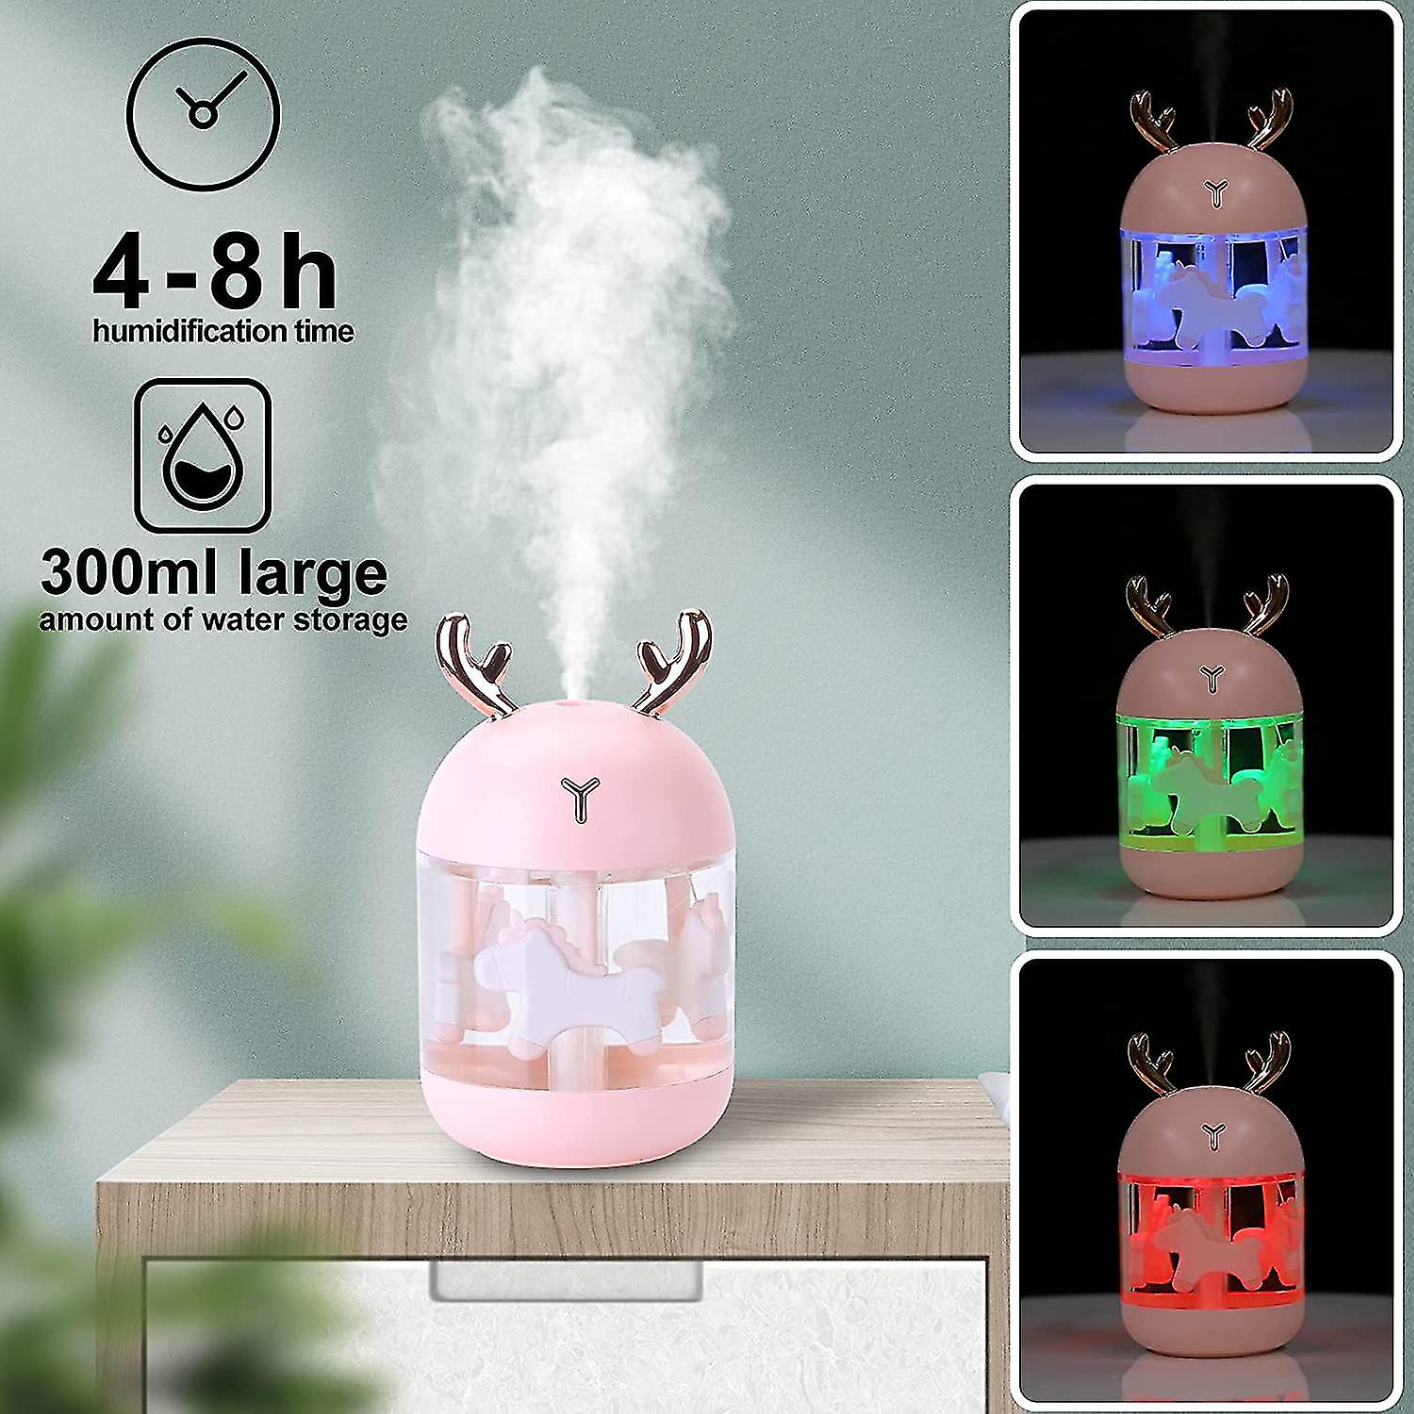 Small Cool Mist Humidifier,300ml Cute Air Humidifiers ,USB Personal Desktop Humidifier with Night Light